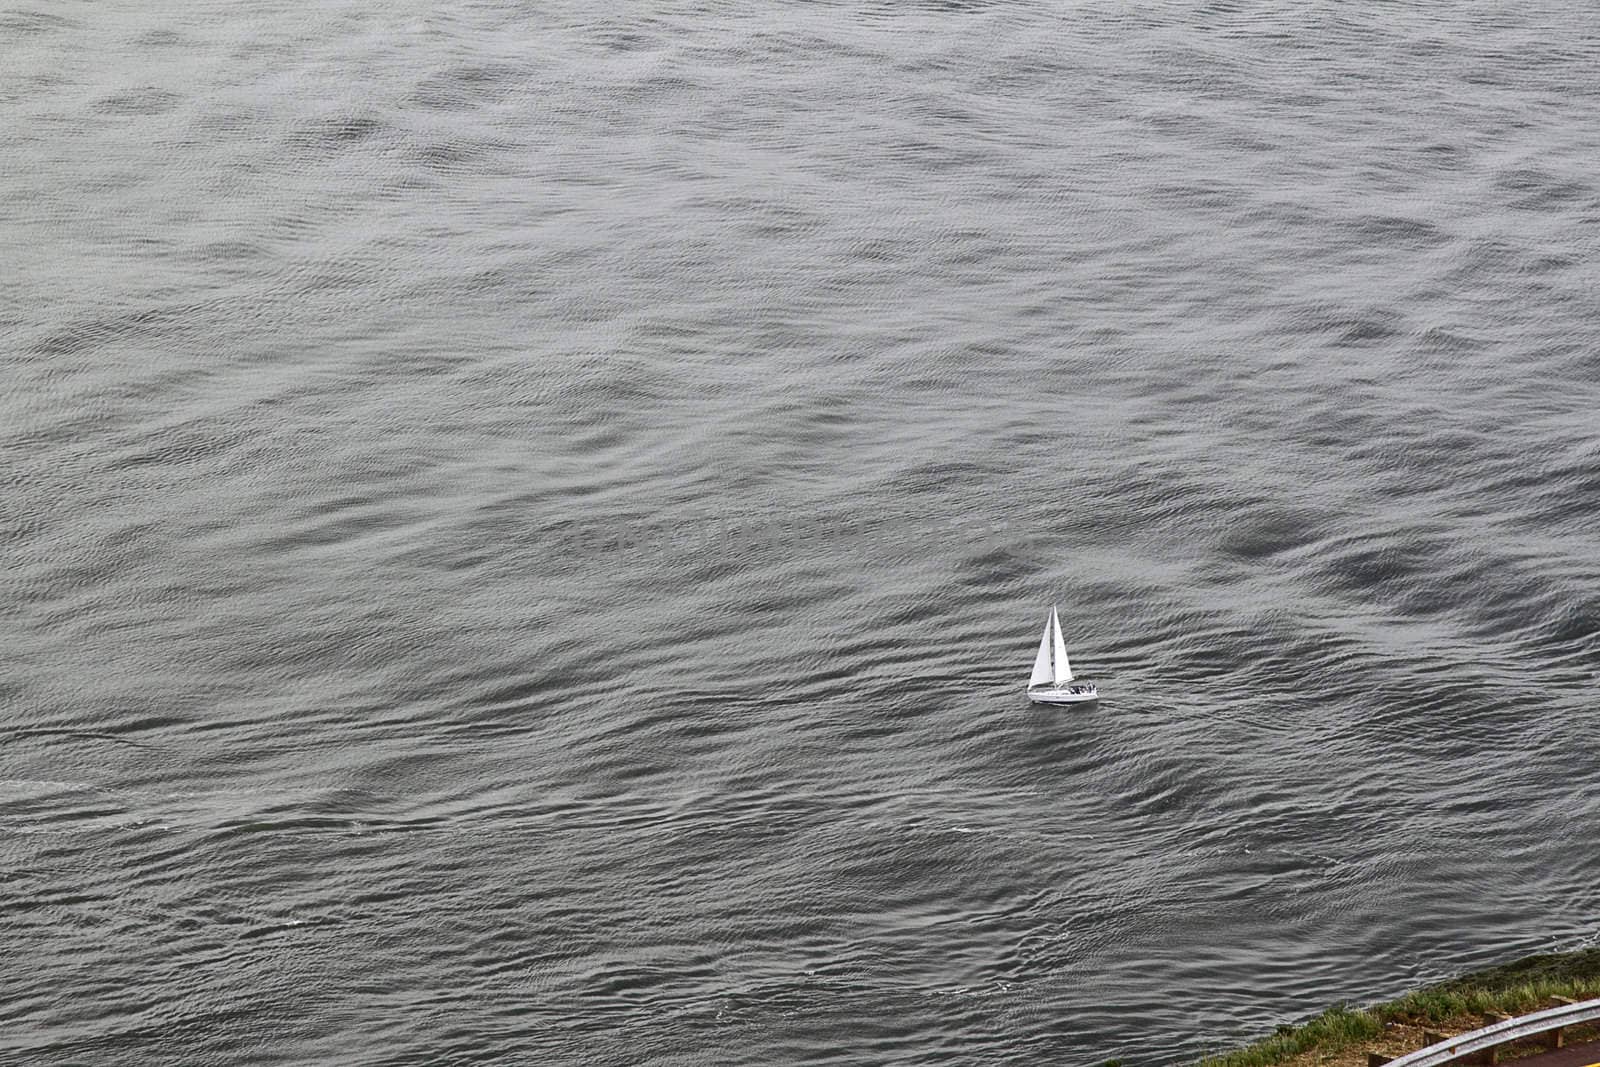 Small white sailboat on grey water